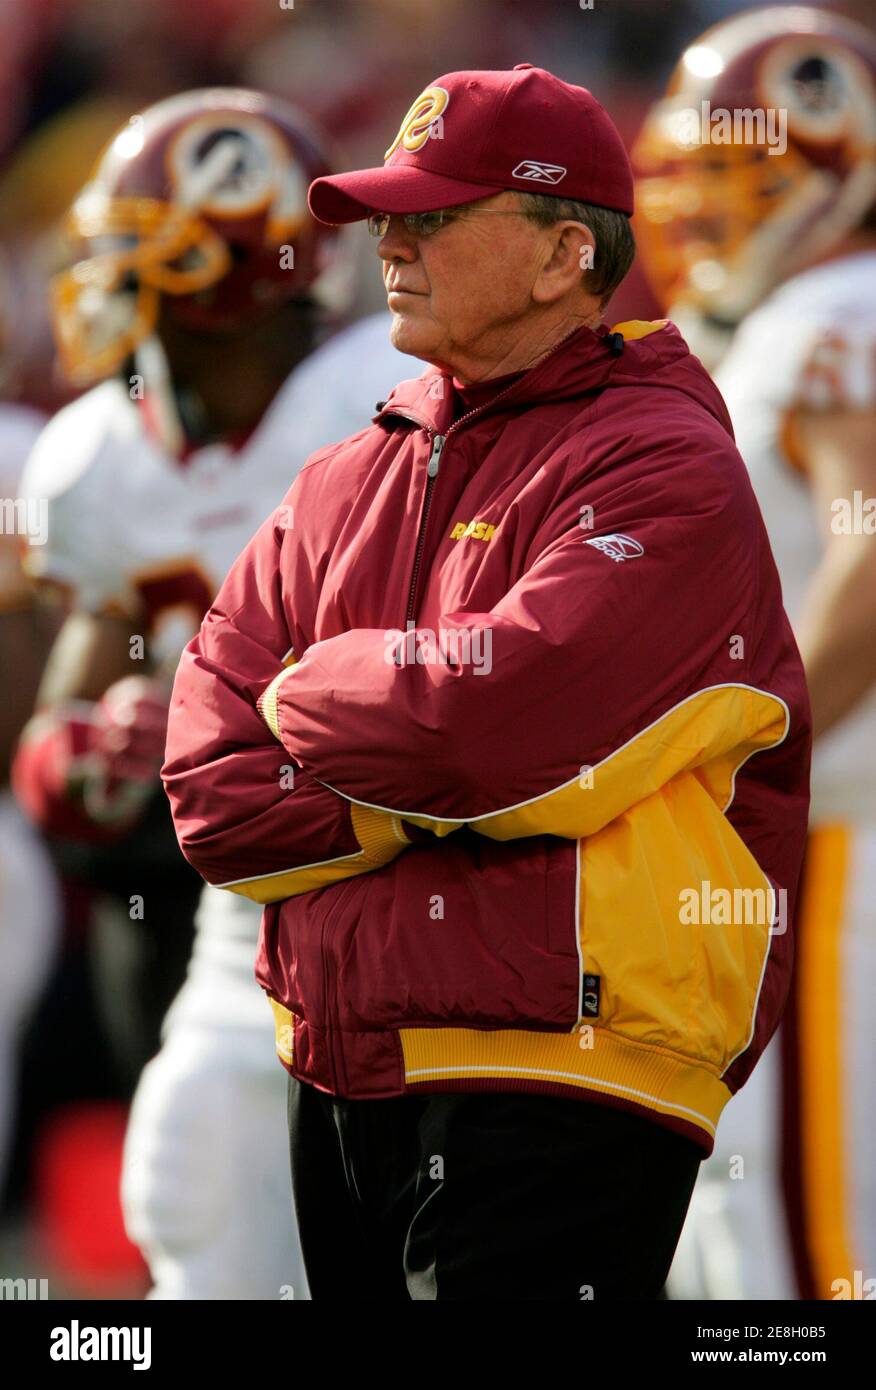 Washington Redskins head coach Joe Gibbs watches his team warm up prior to playing the New York Giants in Landover, Maryland, December 24, 2005. Gibbs' Redskins' defeated the Giants 35-20 to stay alive in their quest for post-season play, with one regular season game remaining in the NFL season. Picture taken December 24, 2005. REUTERS/Gary Cameron Stock Photo